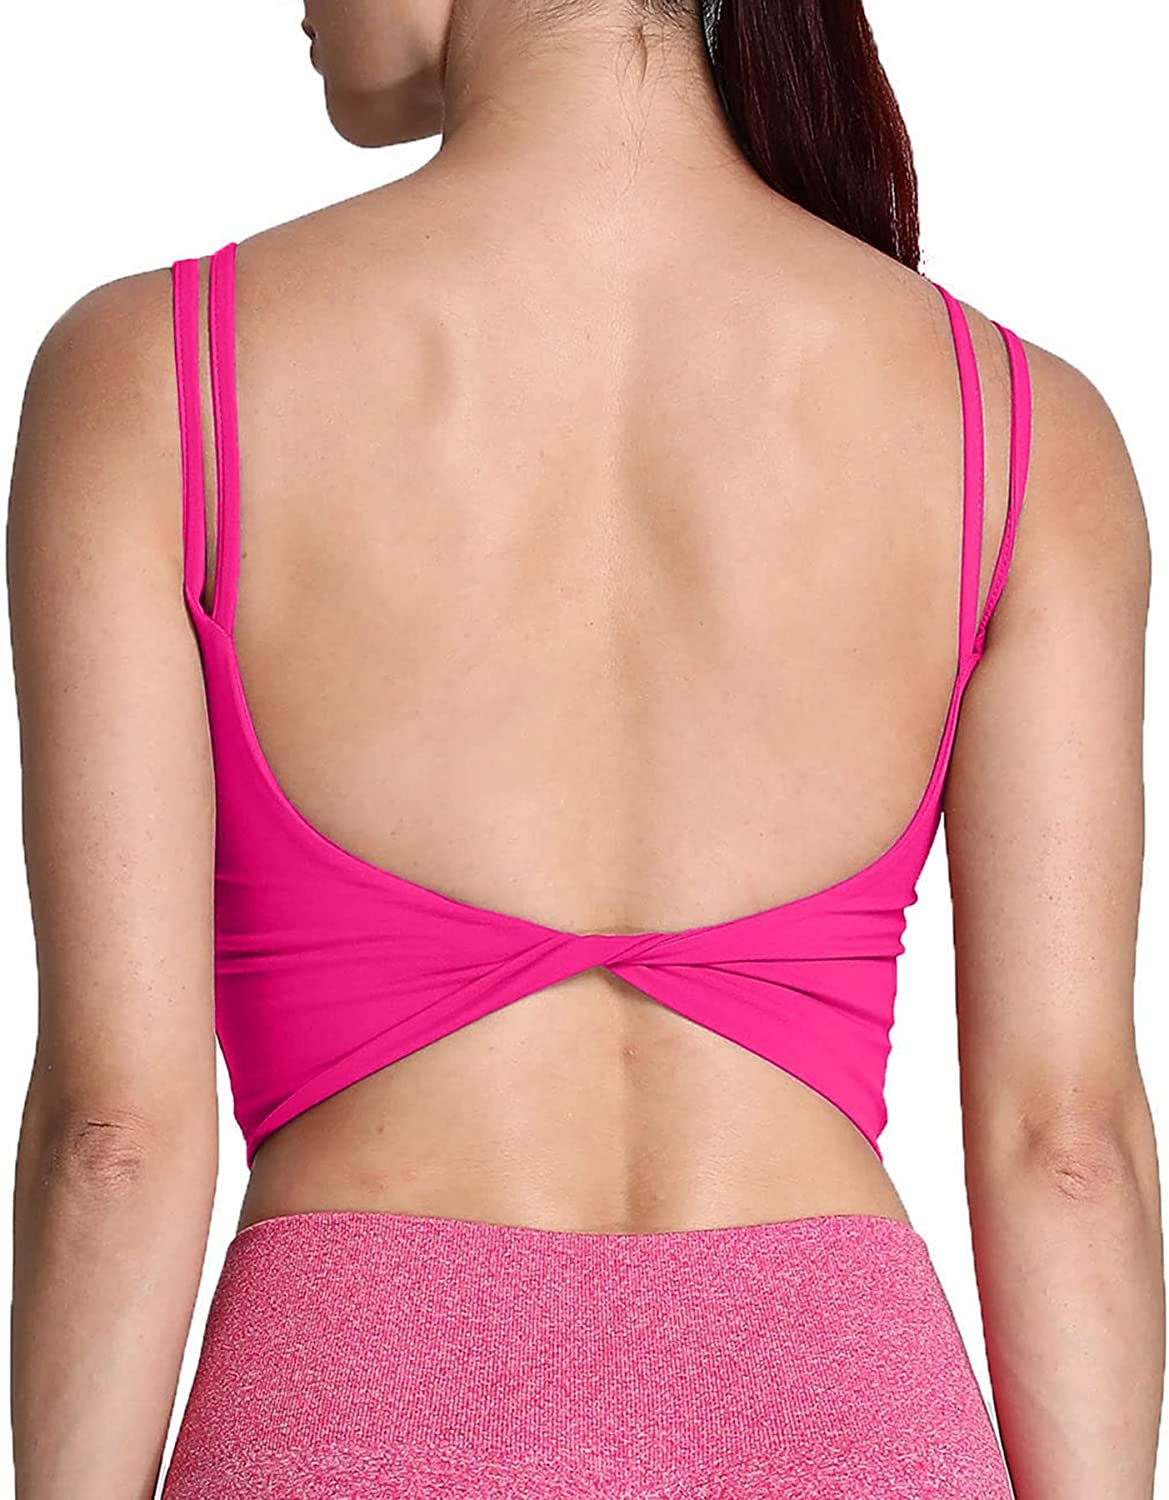 Aoxjox Women's Workout Sports Bra with Crossed Back Straps and Padding